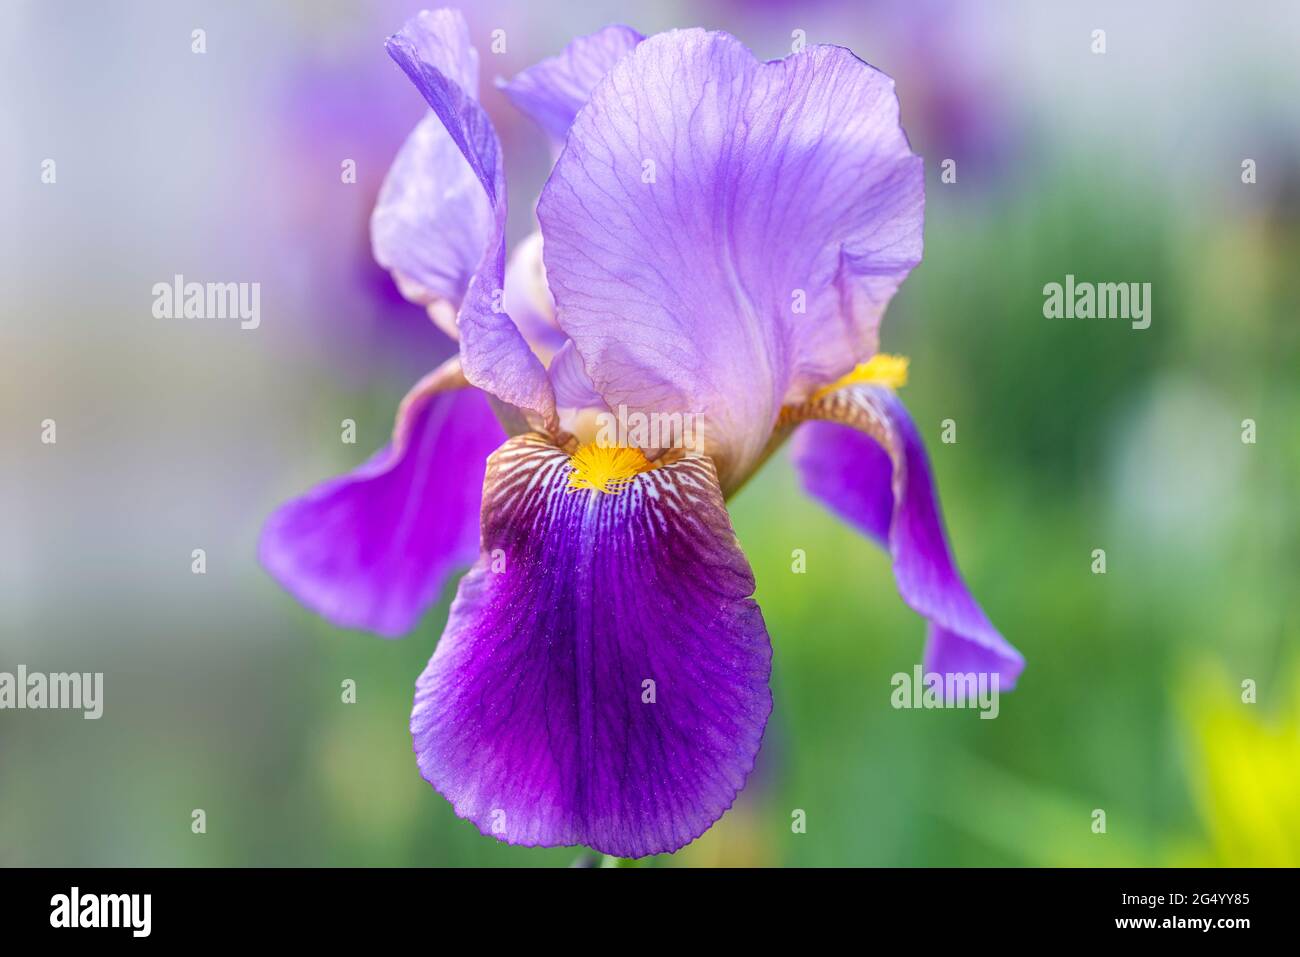 Picture of a colorful bearded iris with lavender, purple, and yellow colors set in an abstracted background. Stock Photo